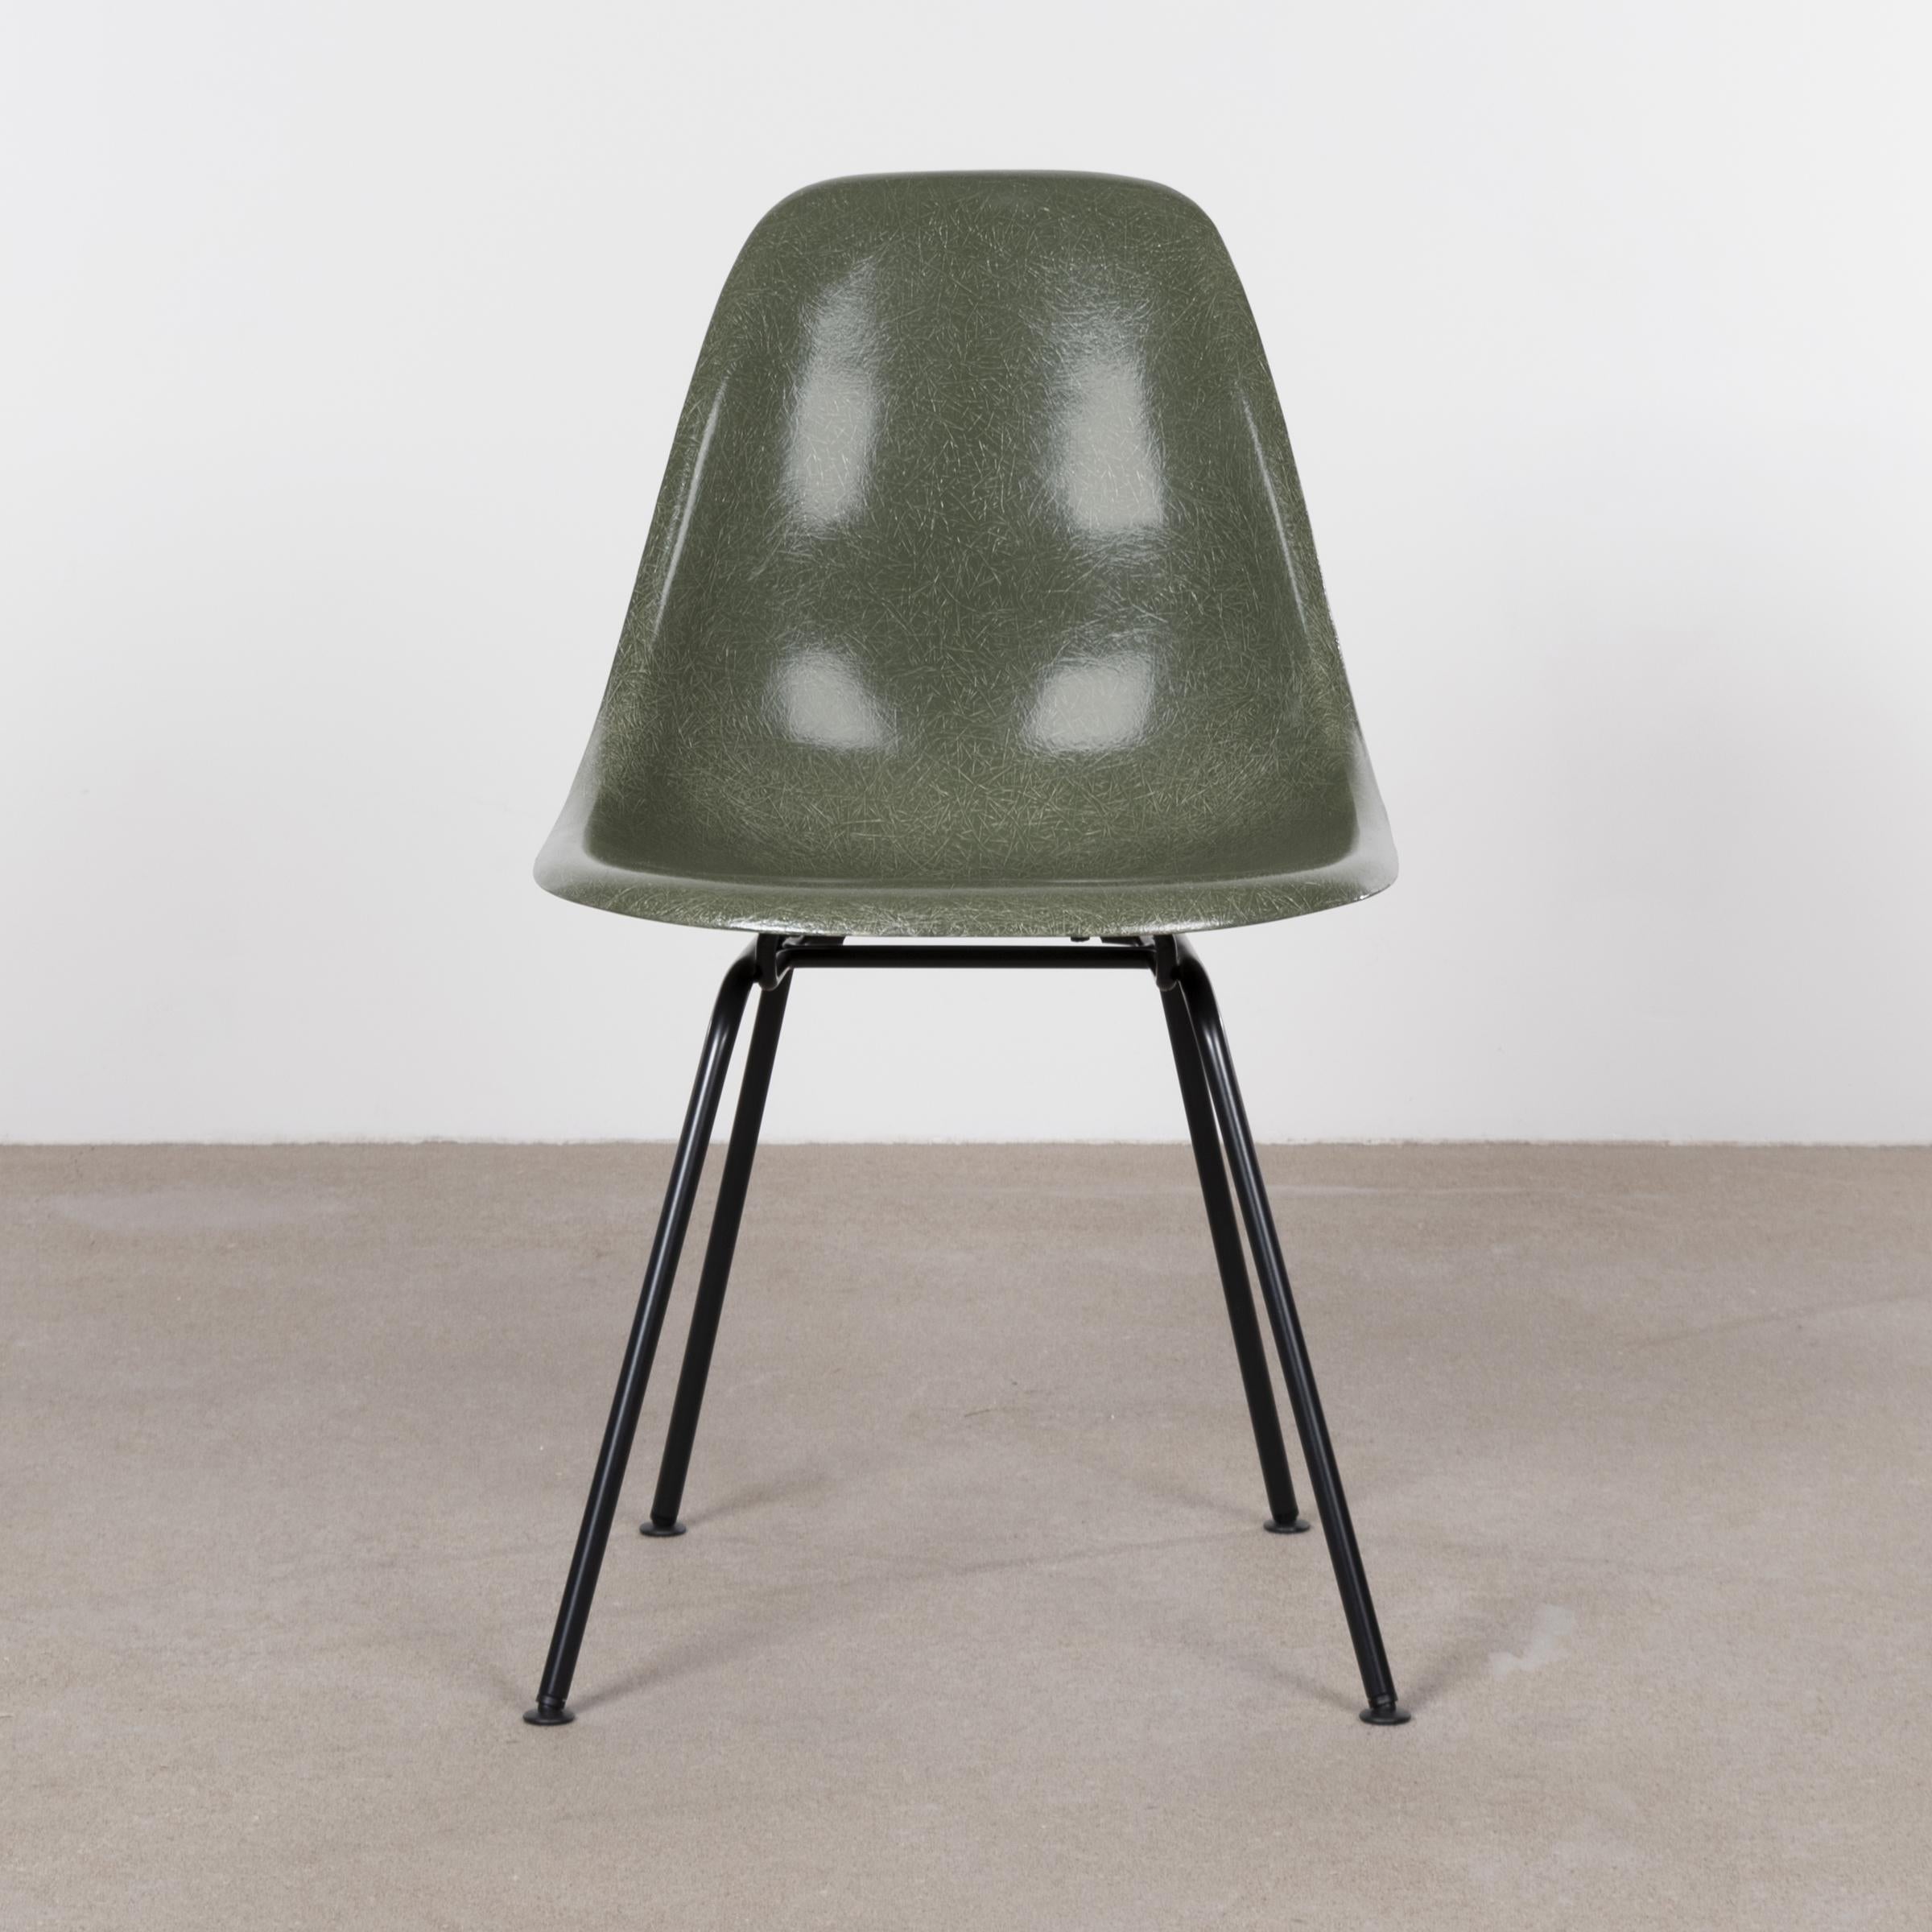 Mid-20th Century Eames Olive Green Dark DSX Dining Chair for Herman Miller